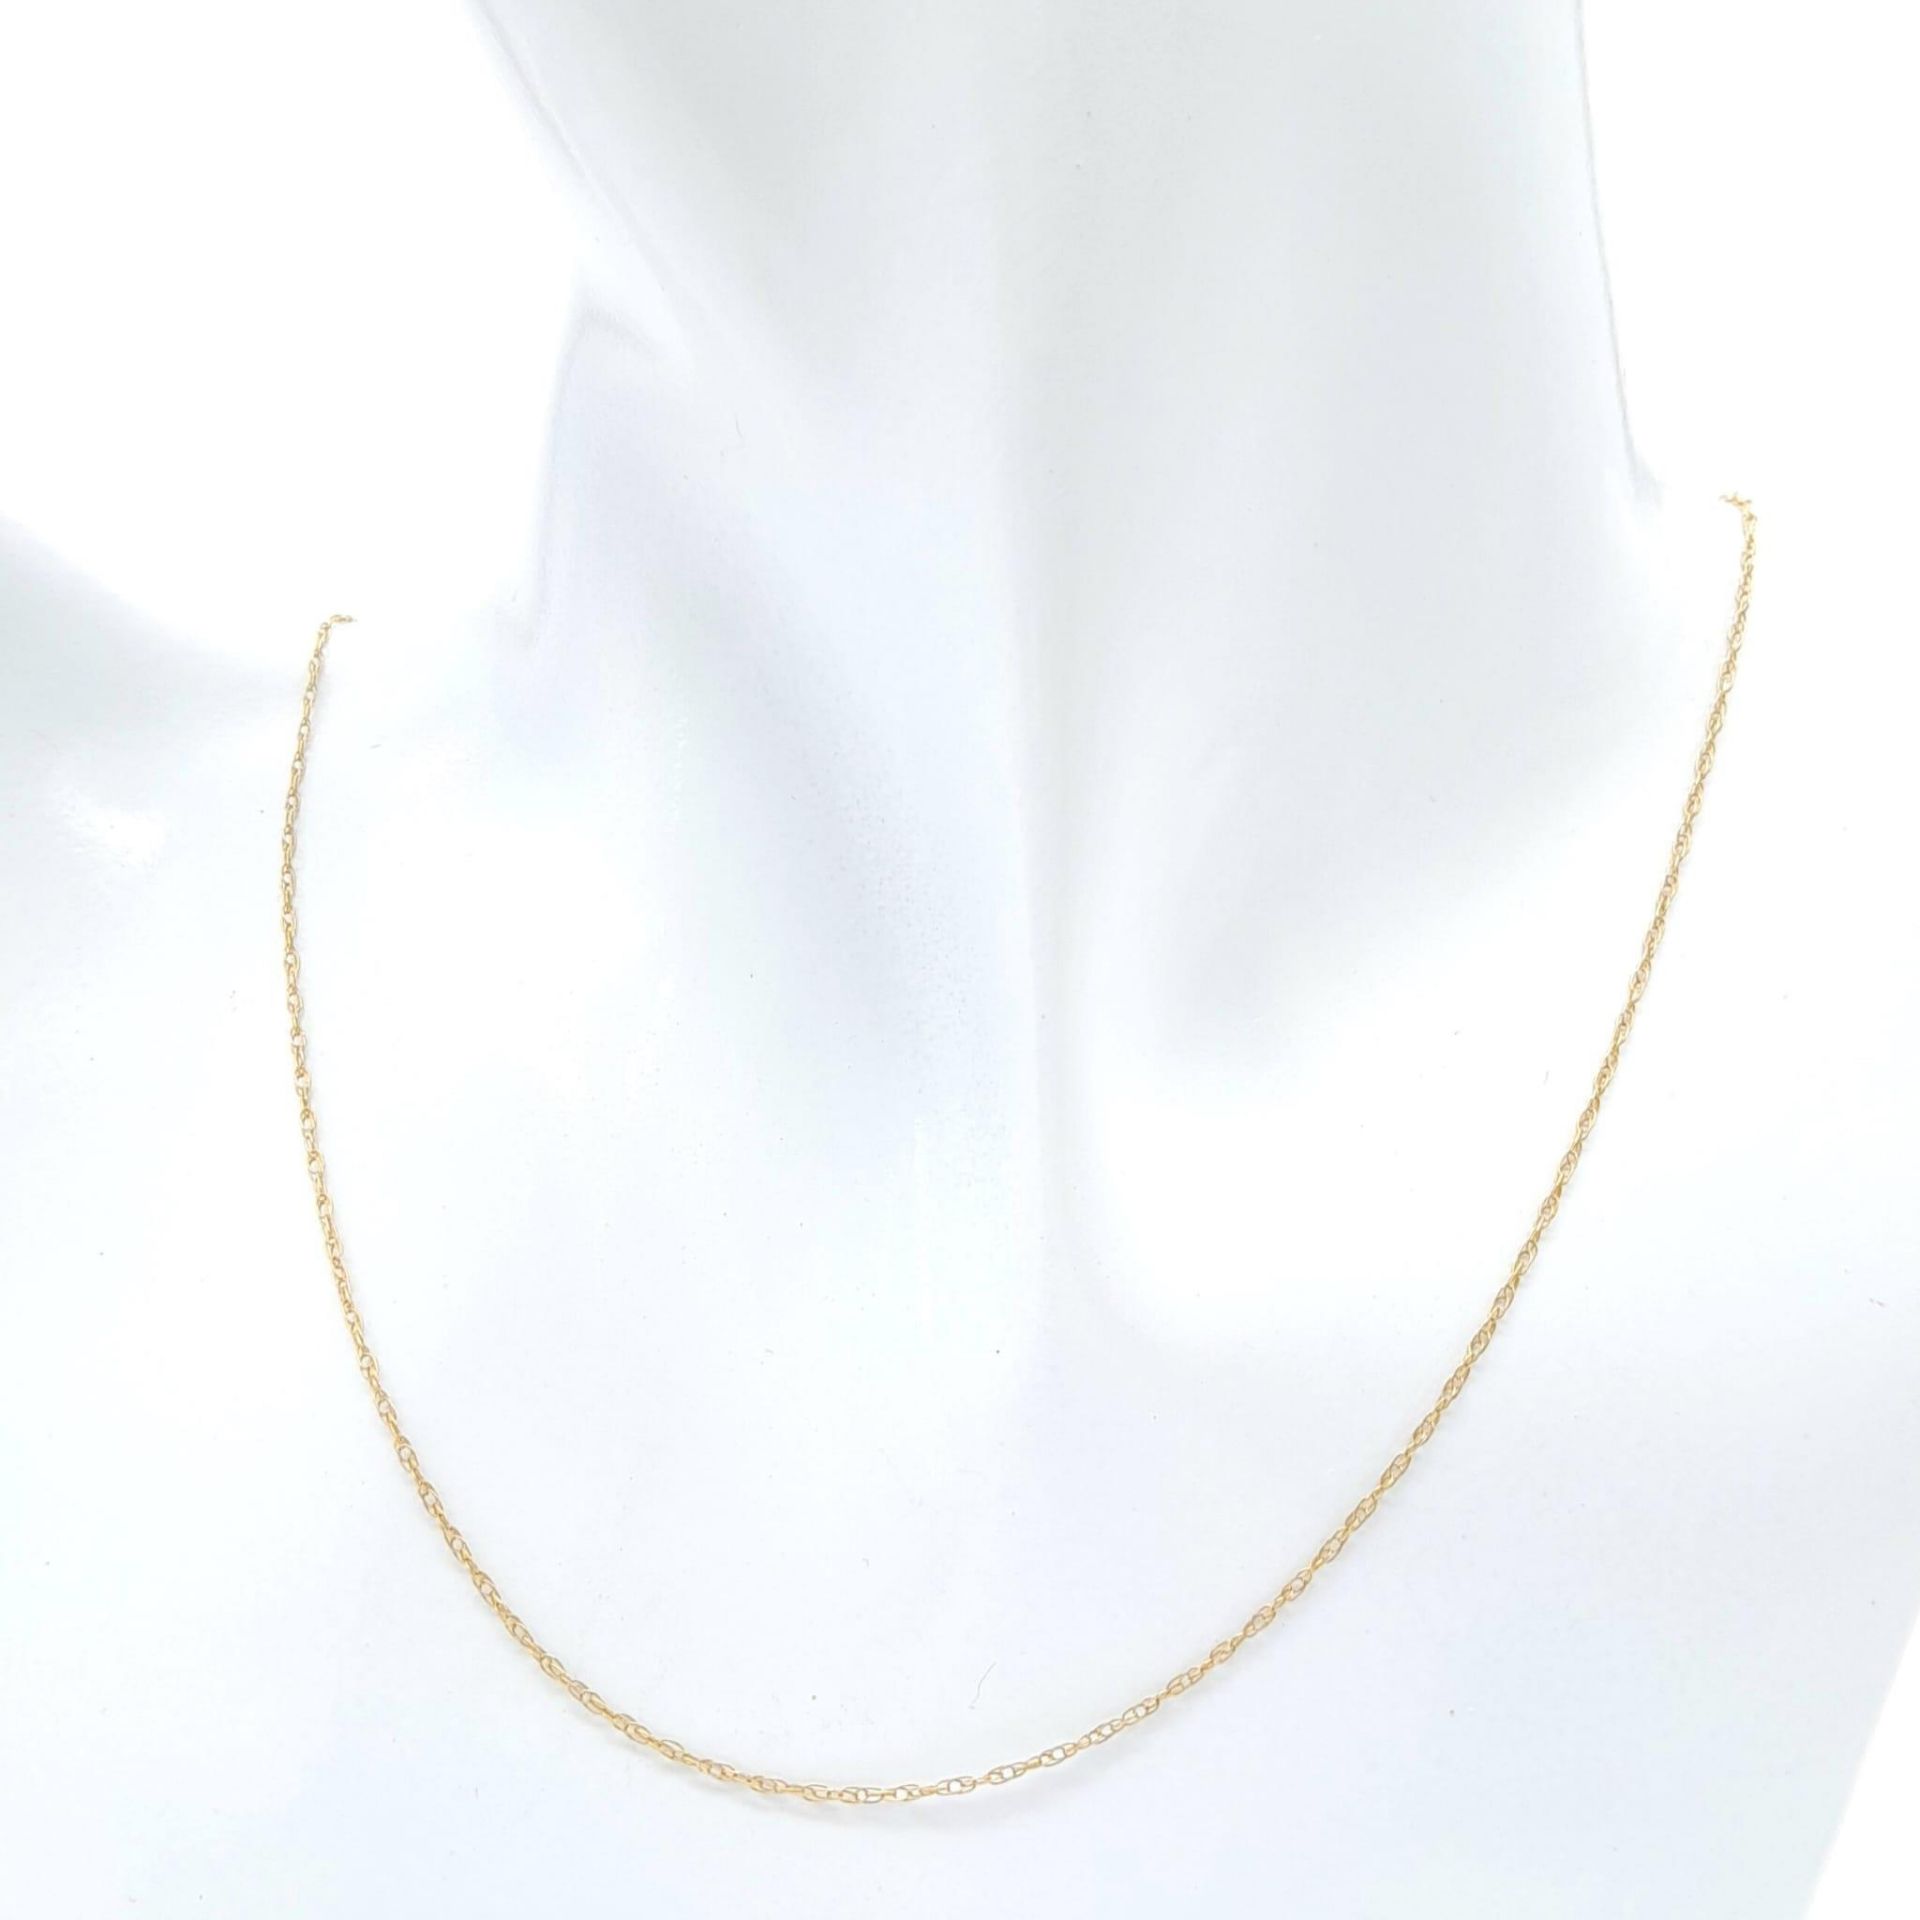 A 9K Yellow Gold Disappearing Necklace. 48cm length. 0.75g weight. - Image 2 of 5